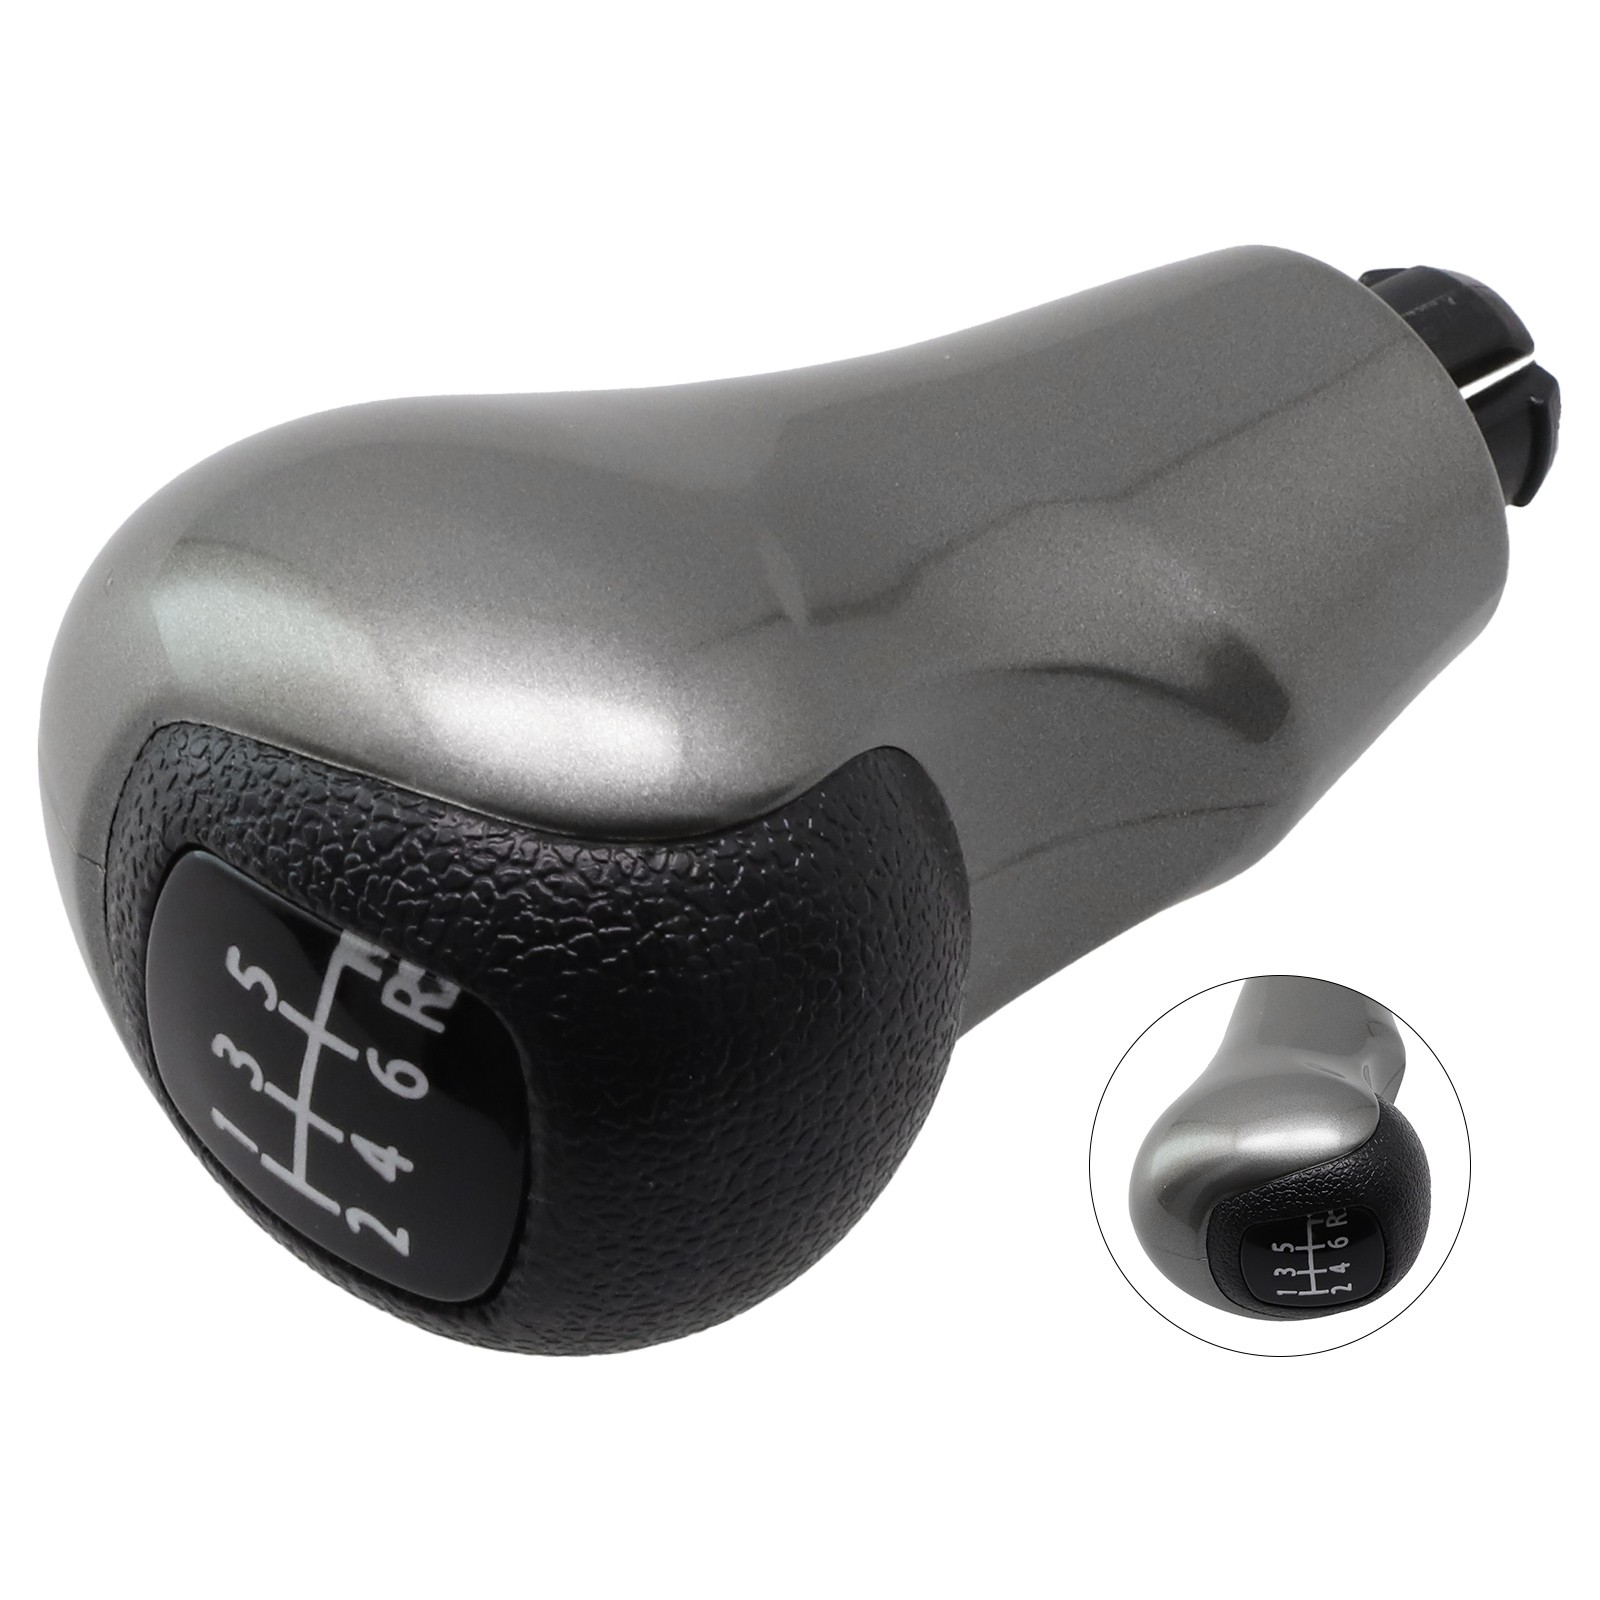 Auto Fashionstyle Sleek Black And Grey Gear Shift Knob Stick Shifter For